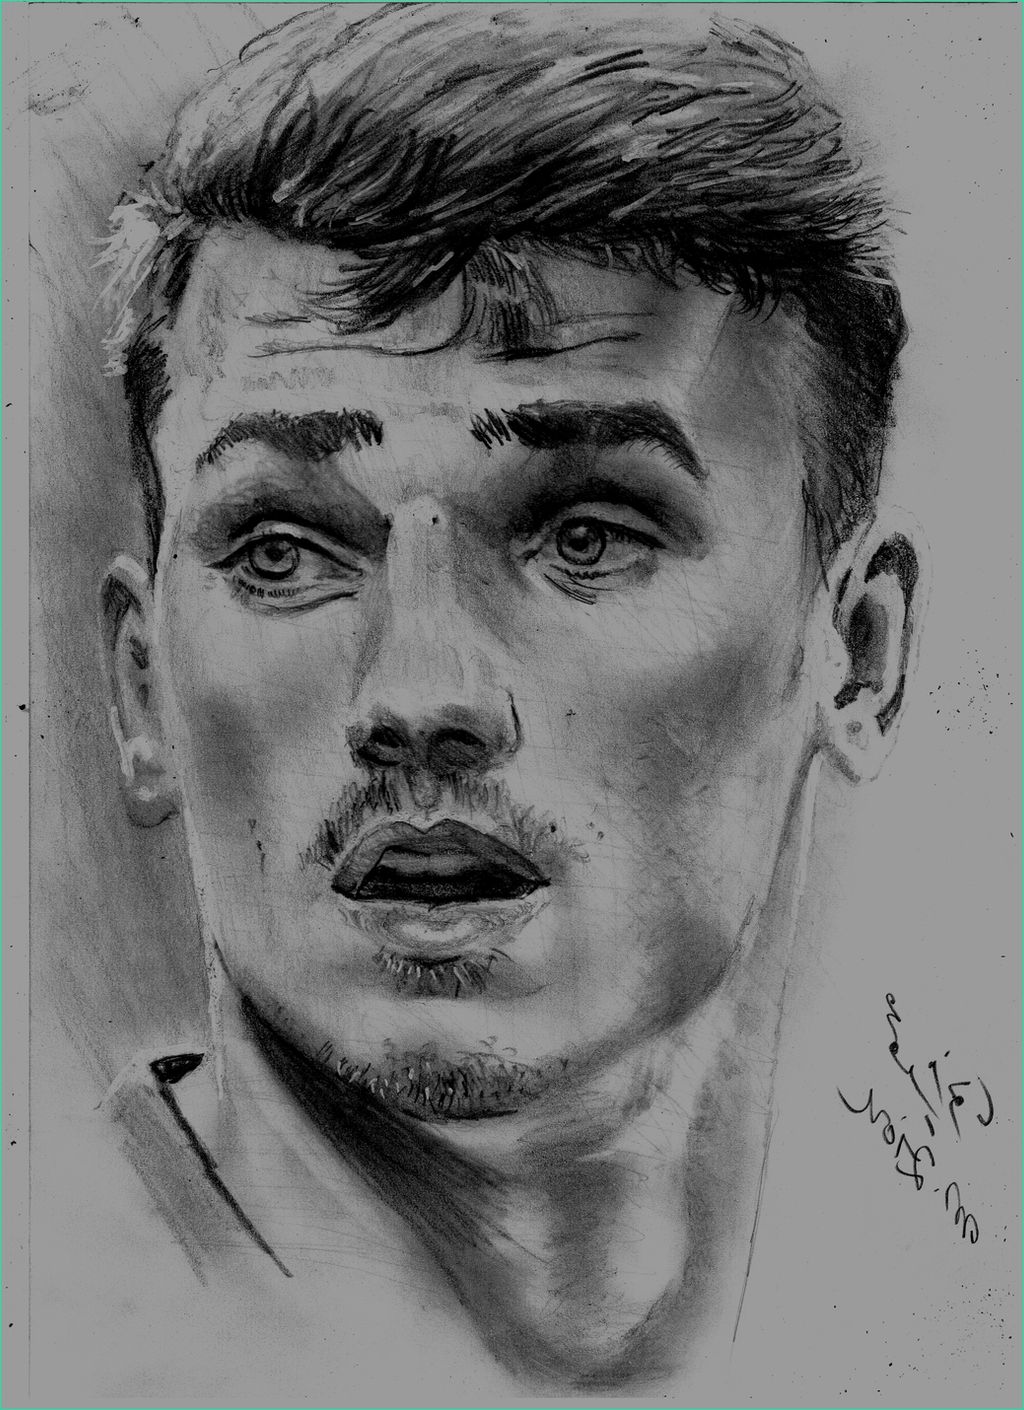 Antoine Griezmann by Mohamed Ziou